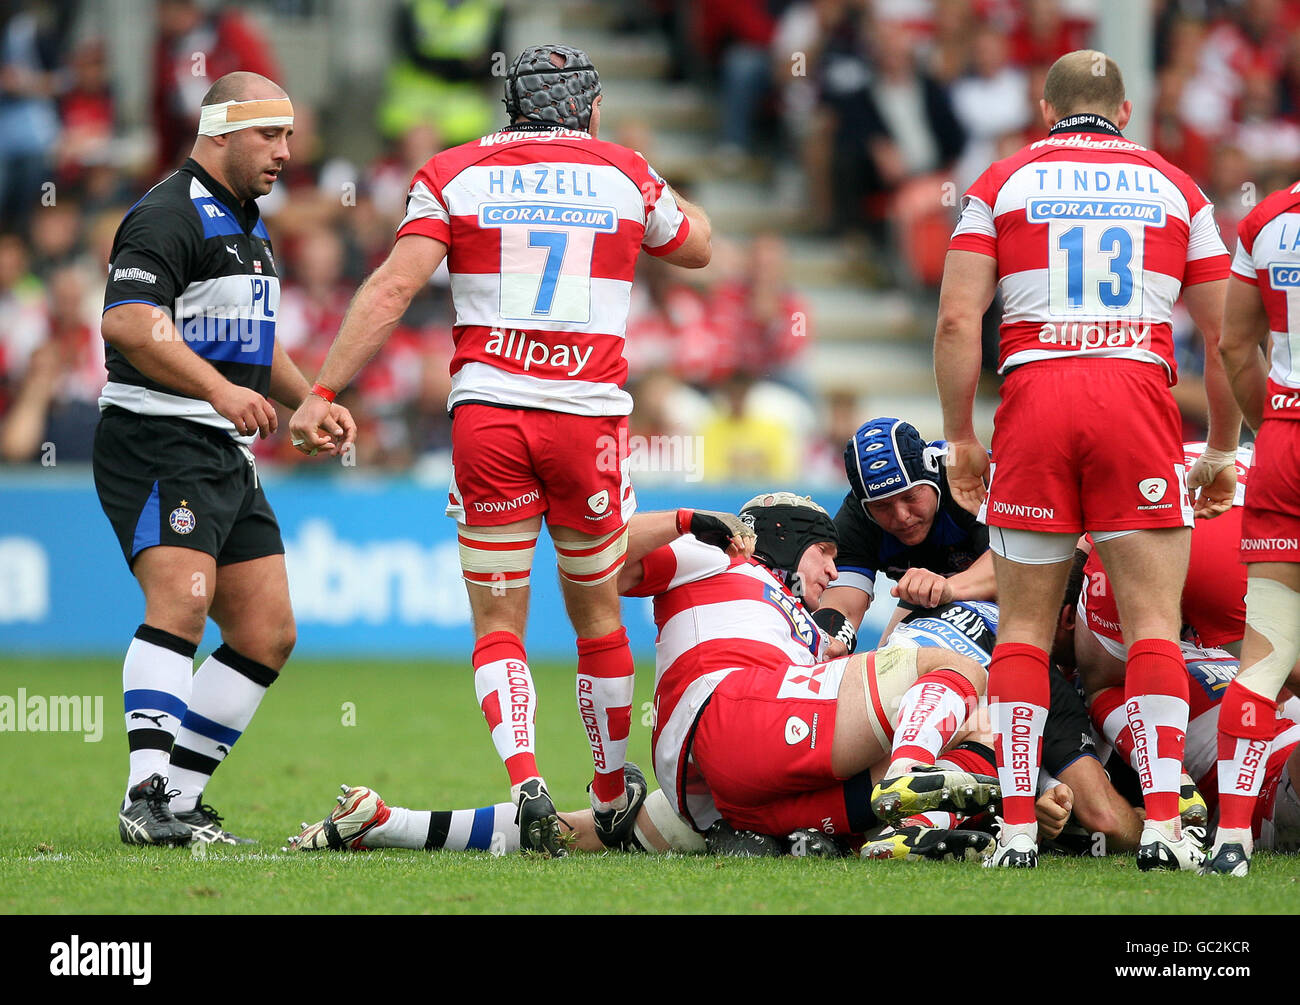 Rugby Union - Guinness Premiership - Gloucester Rugby v Bath Rugby - Kingsholm. Gloucester Rugby's Andrew Hazell stamps on the leg of Bath Rugby's Julian Salvi to earn himself a yellow card Stock Photo